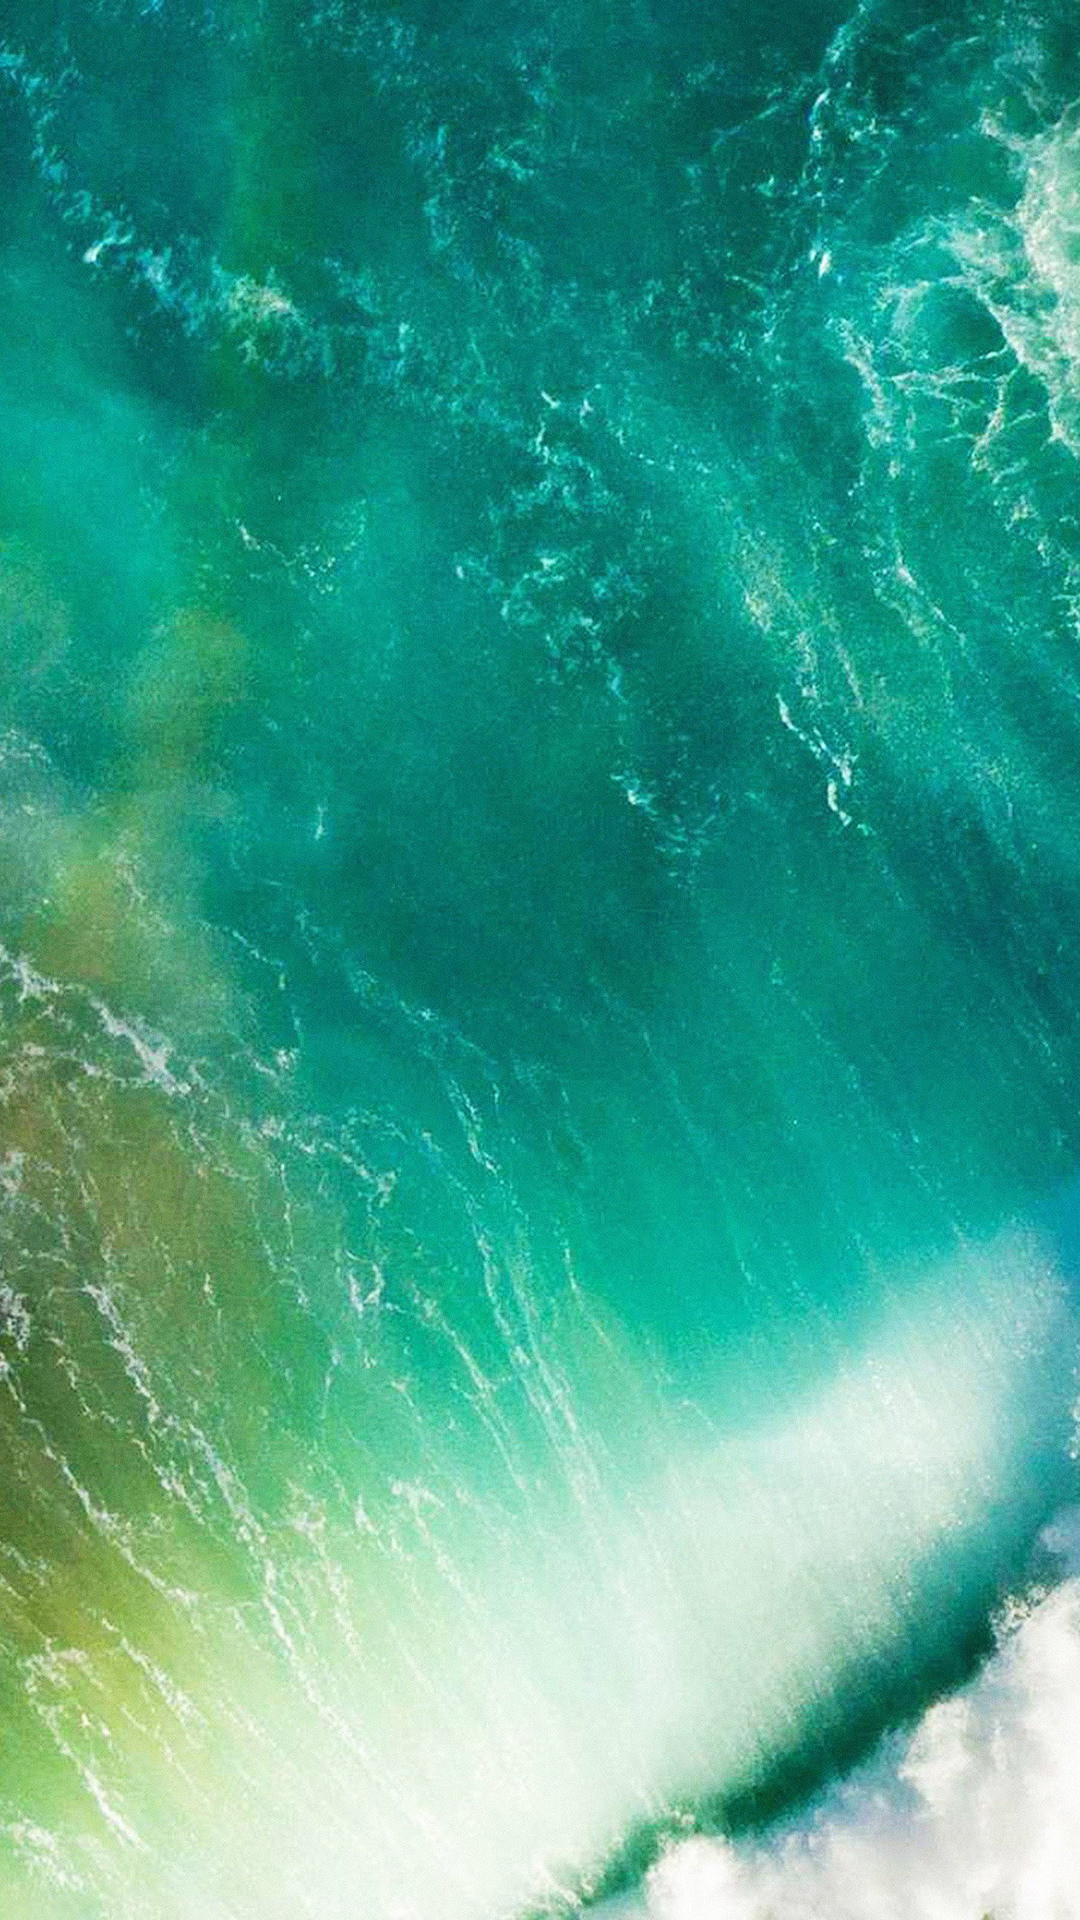 Live Wallpapers 4k Wallpaper Iphone Mobile Wallpaper Iphone 6 Ios 10 32031 Hd Wallpaper Backgrounds Download ✌️battery optimized wave live wallpapers app is optimized for battery life. live wallpapers 4k wallpaper iphone